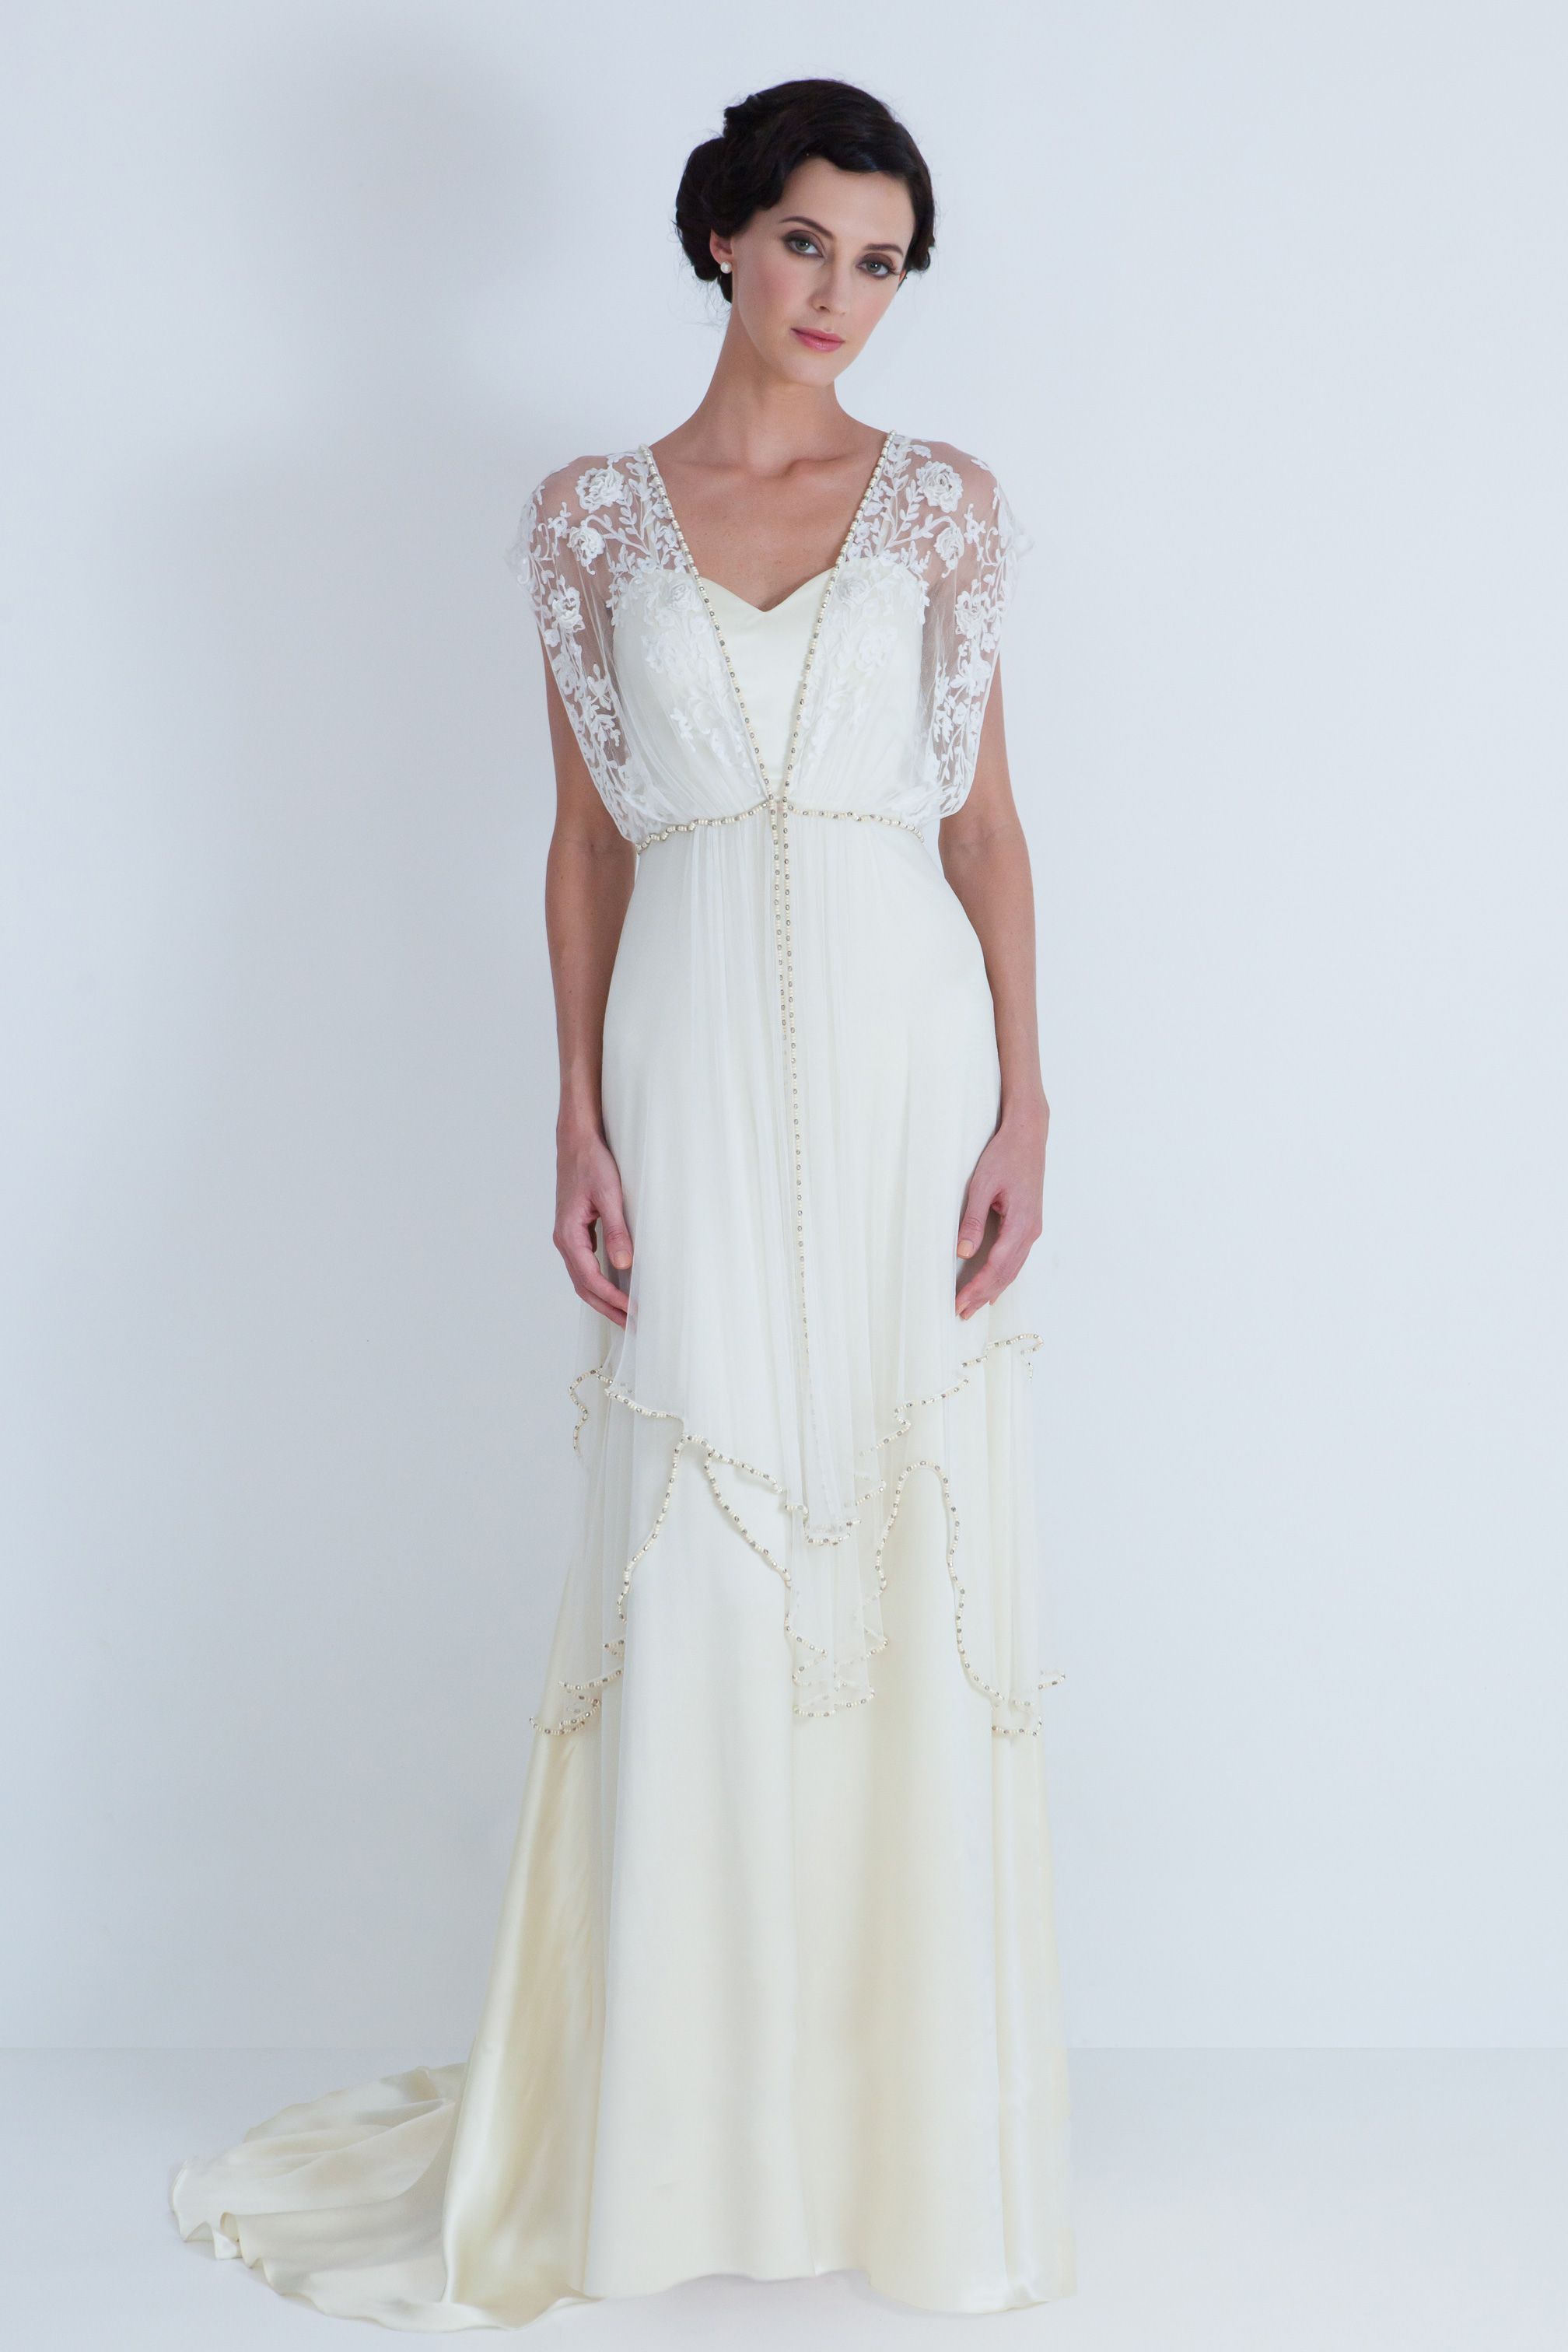 Day 330 – Perfect for art deco themed wedding. Catherine Deane dress